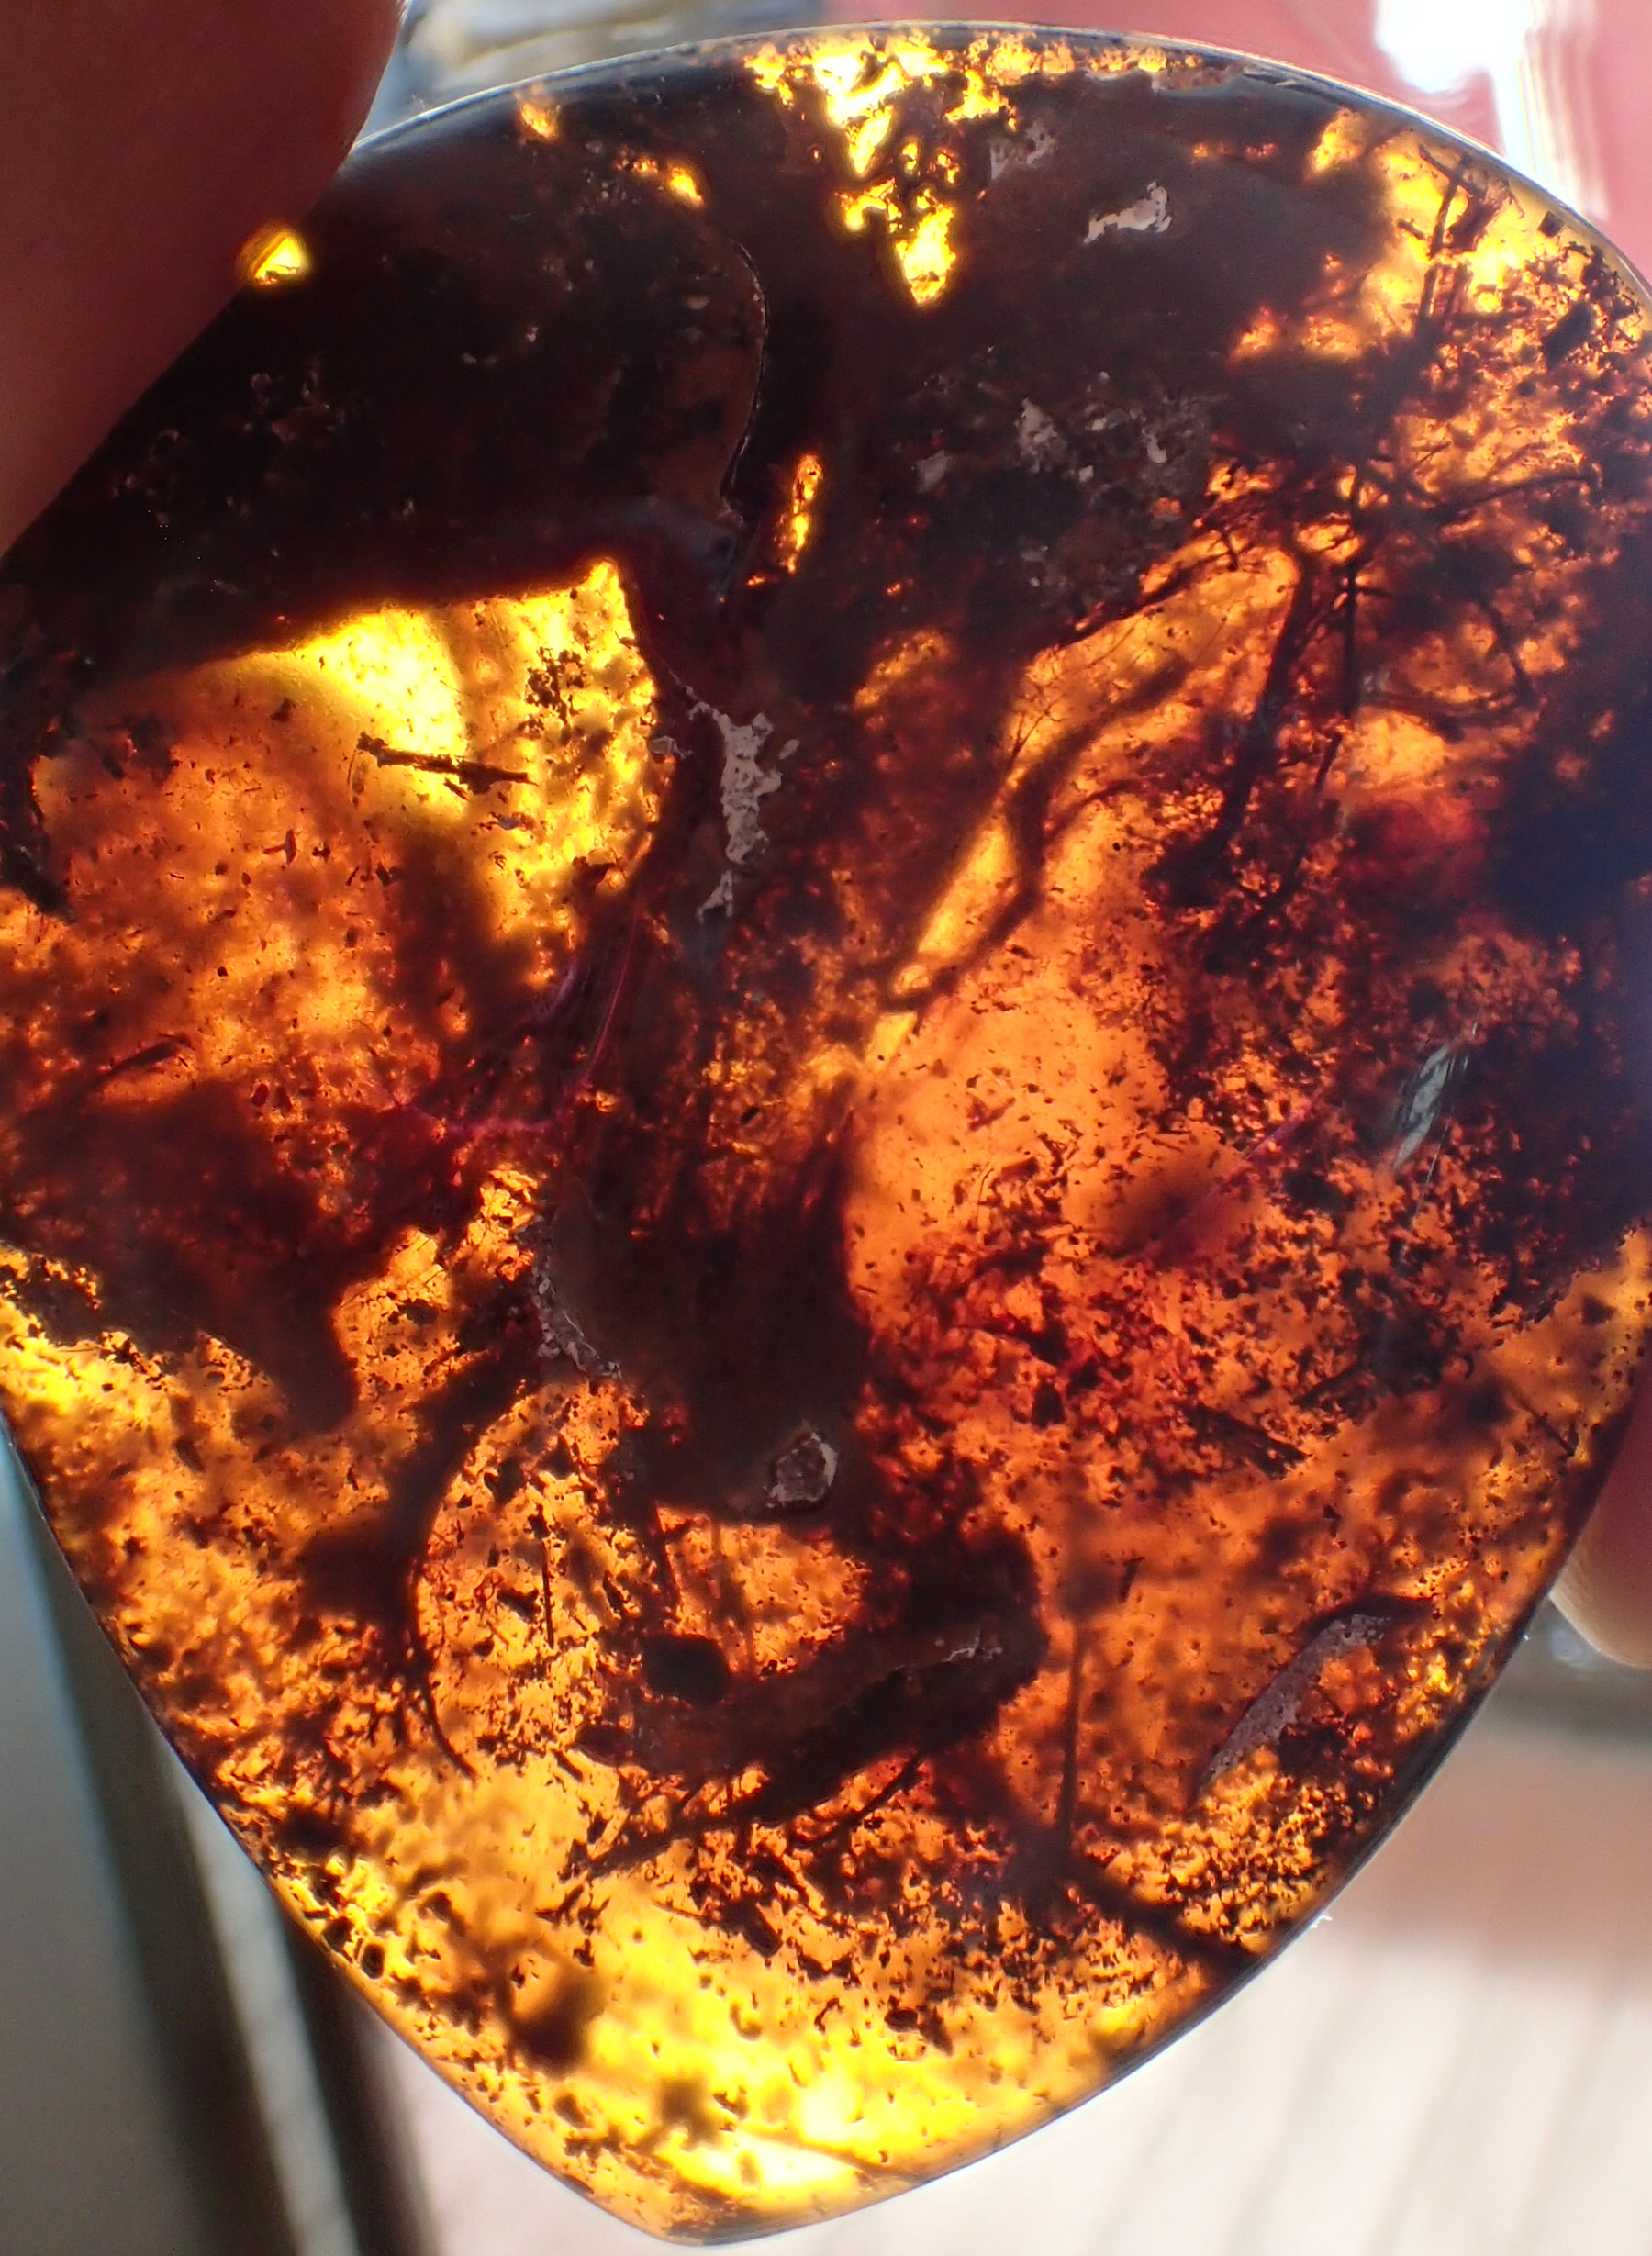  Pterodactyl in amber